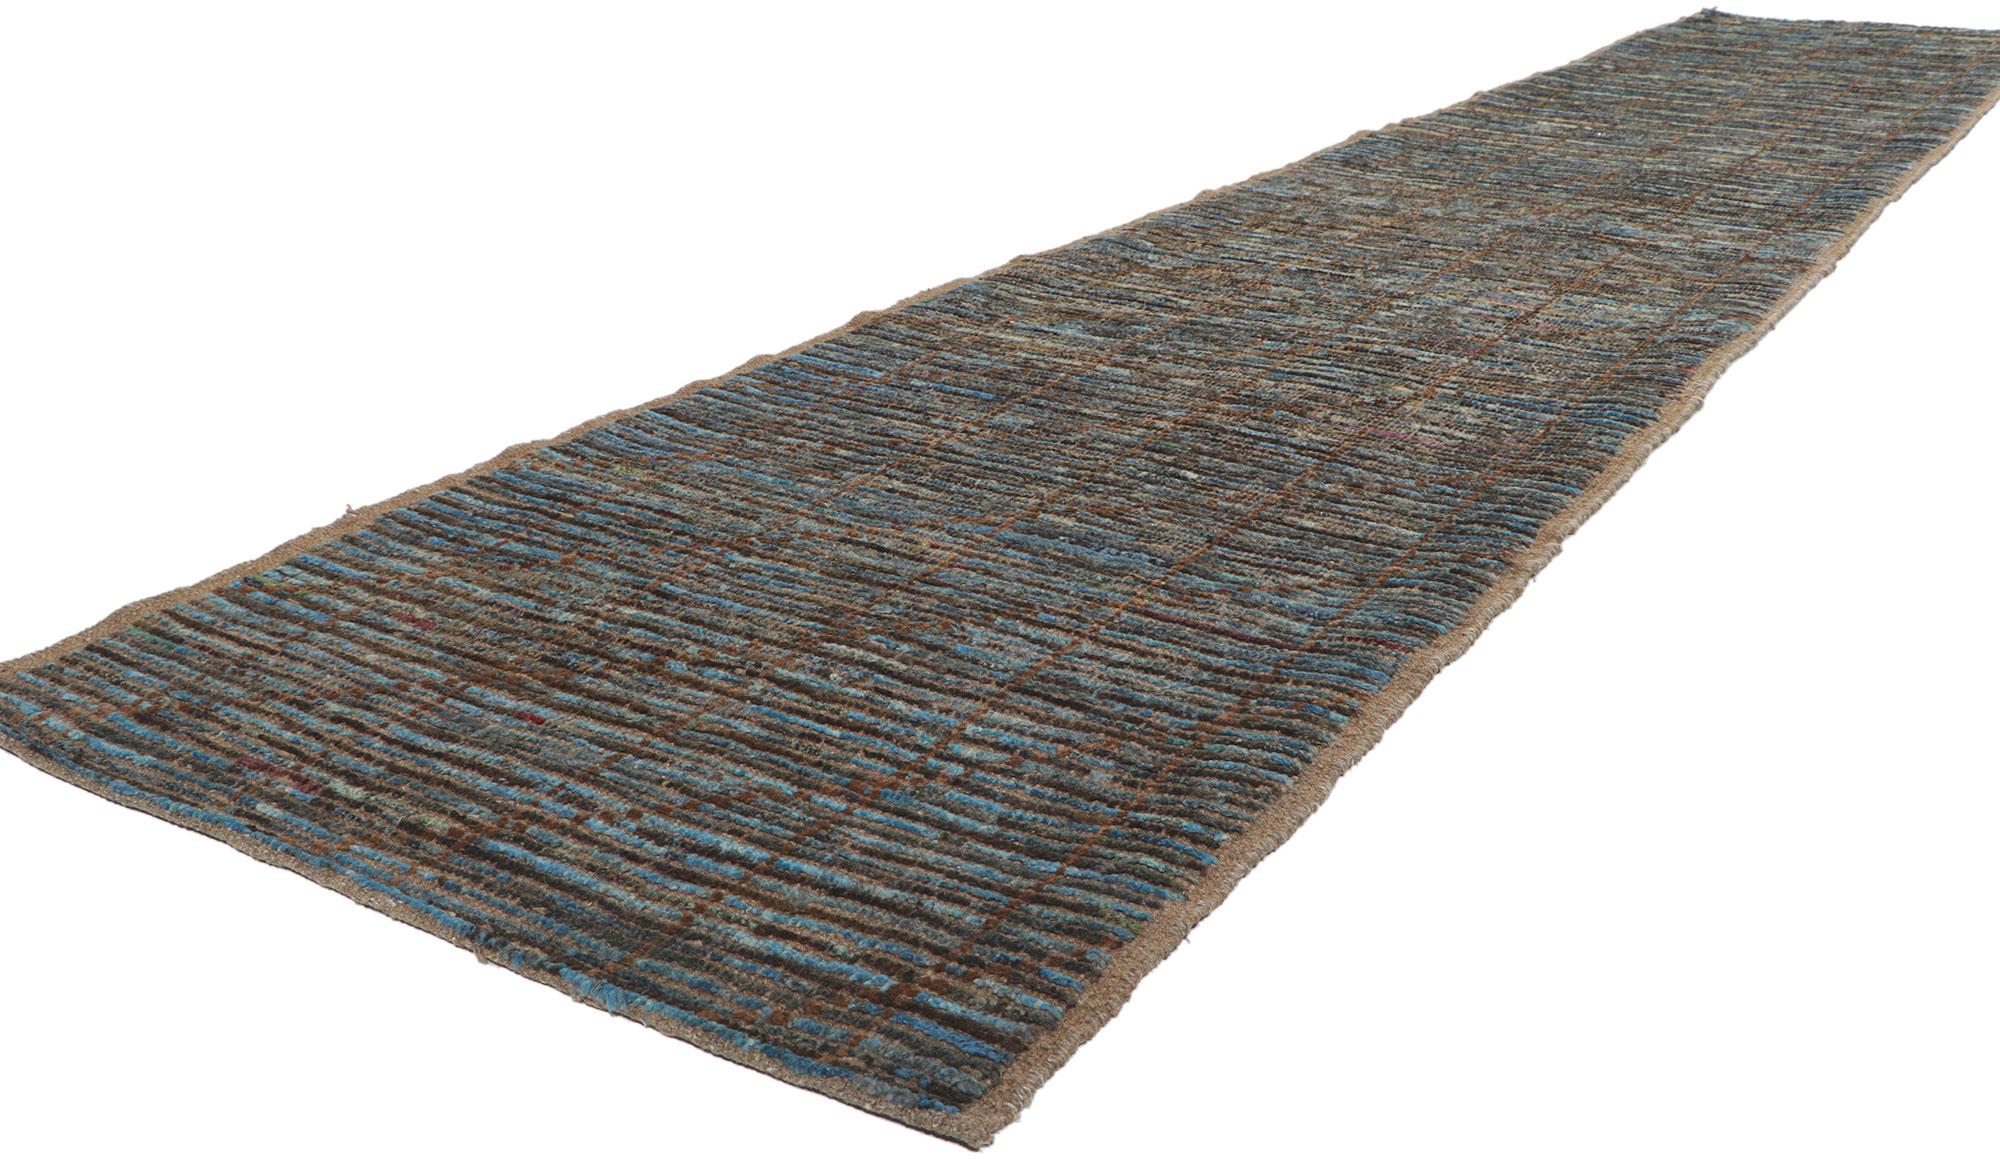 80774 New Moroccan runner with short pile, 02.09 x 15.06. Showcasing a modern design, incredible detail and texture, this hand knotted wool contemporary Moroccan runner is a captivating vision of woven beauty. The inconspicuous lines and earthy